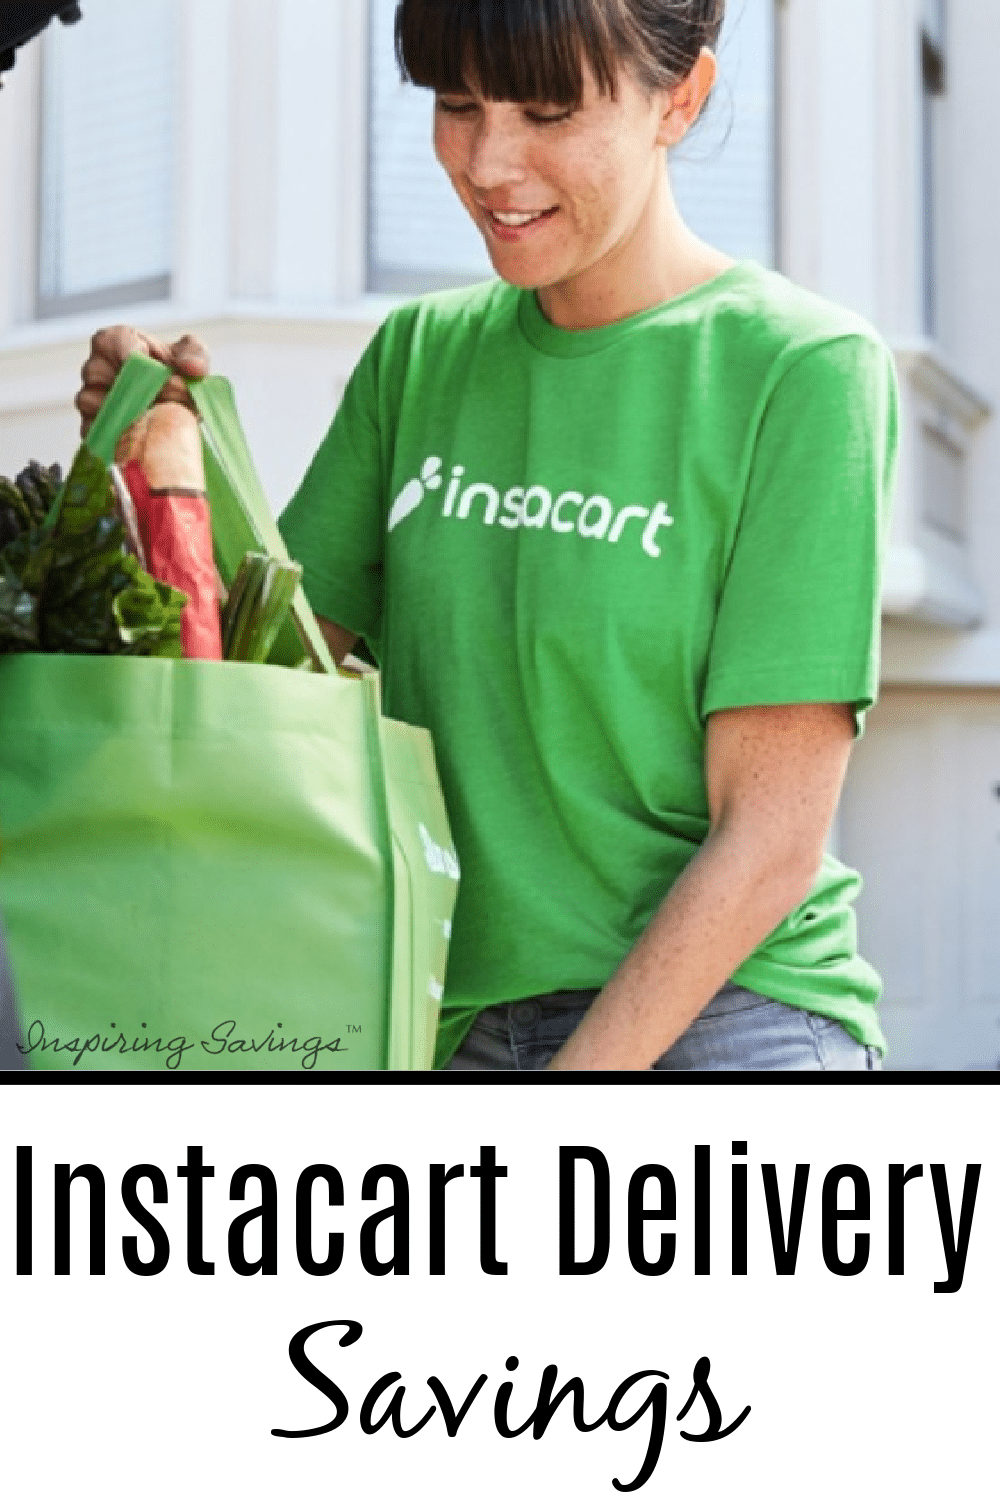 Price Chopper Delivers Your Groceries Through Instacart Grocery